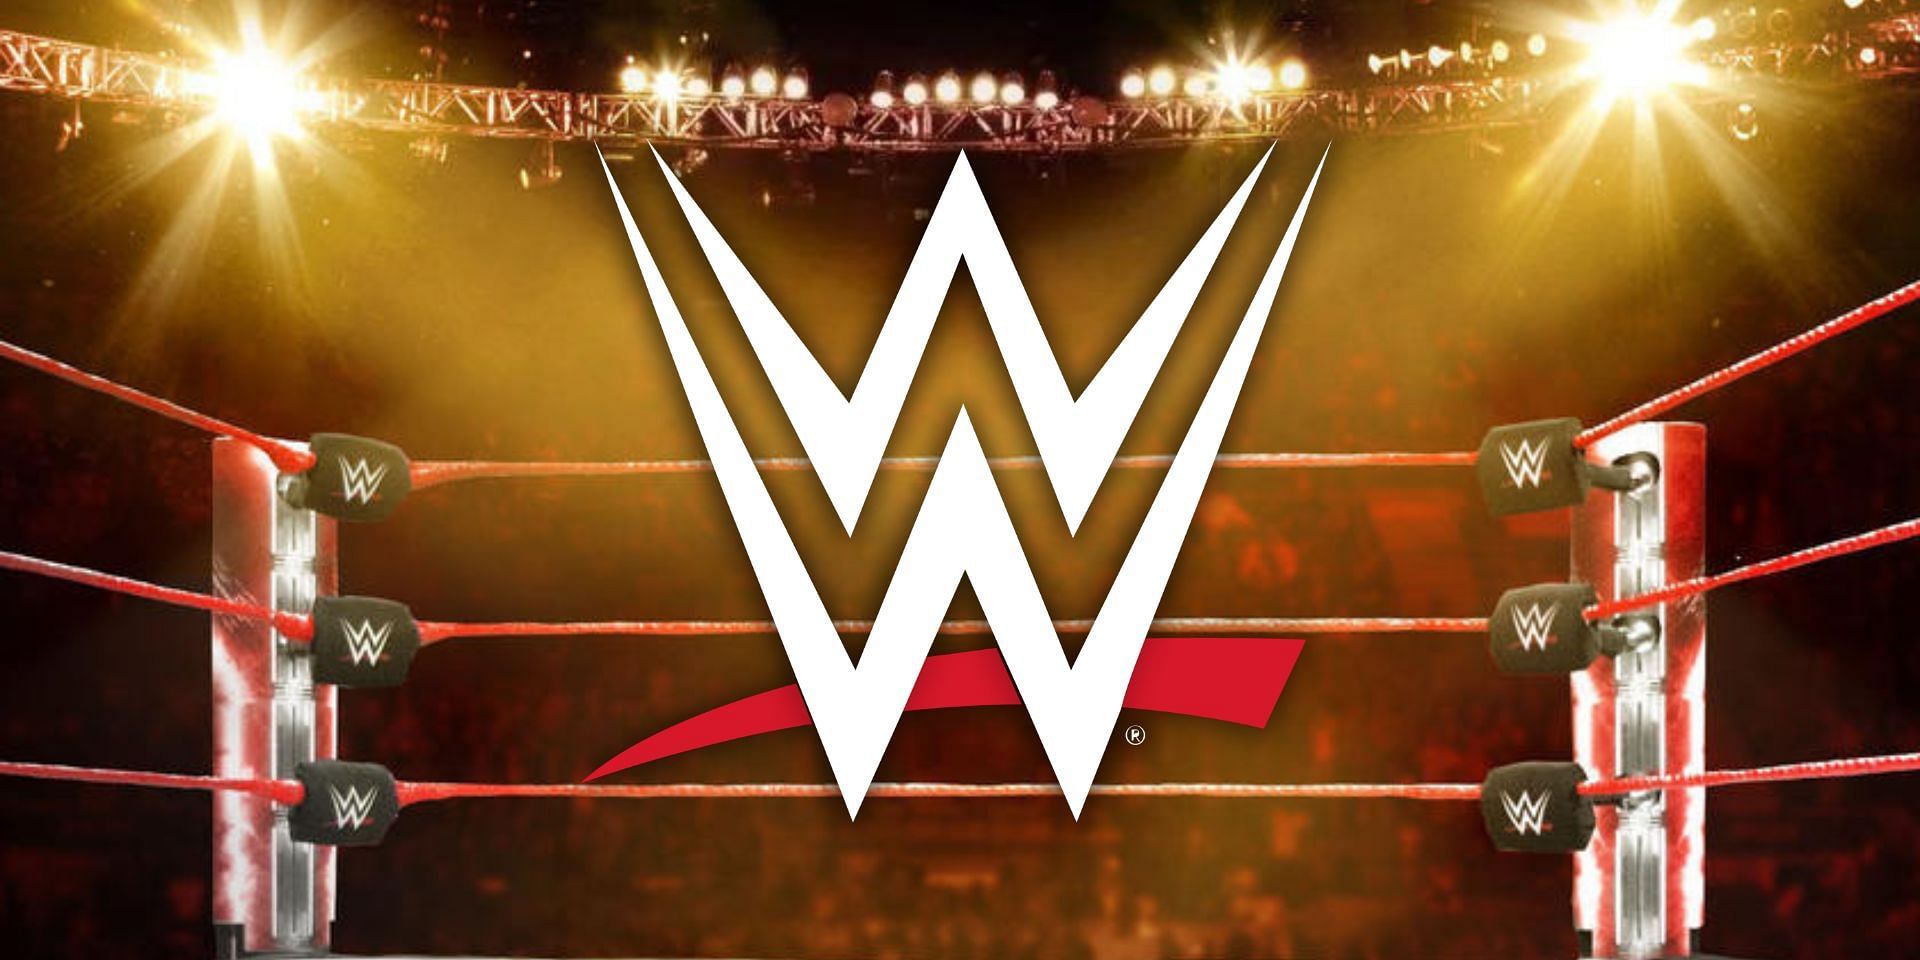 A major WWE star has confirmed their retirement